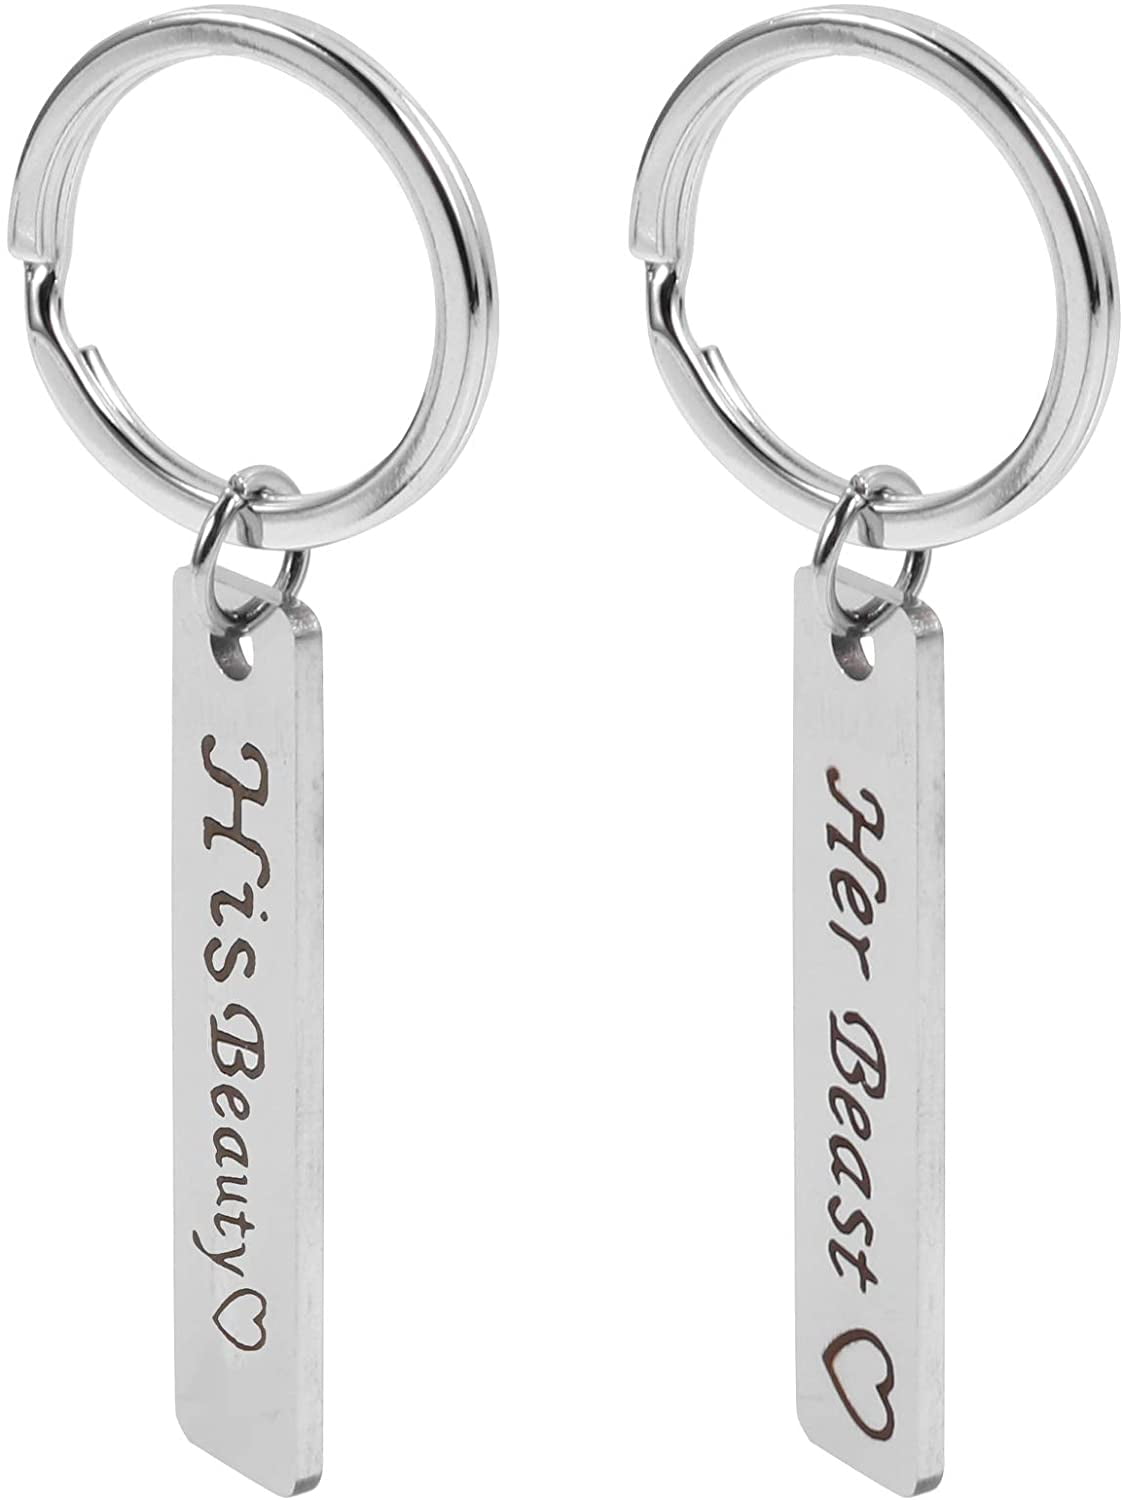 Anniversary Keychain For Wife Girls Birthday Gifts Keyrings Funny Car Key Holder Bracelet Keychains You Can Take The Girl Out Of California Shell Always Be a Clovis Girl